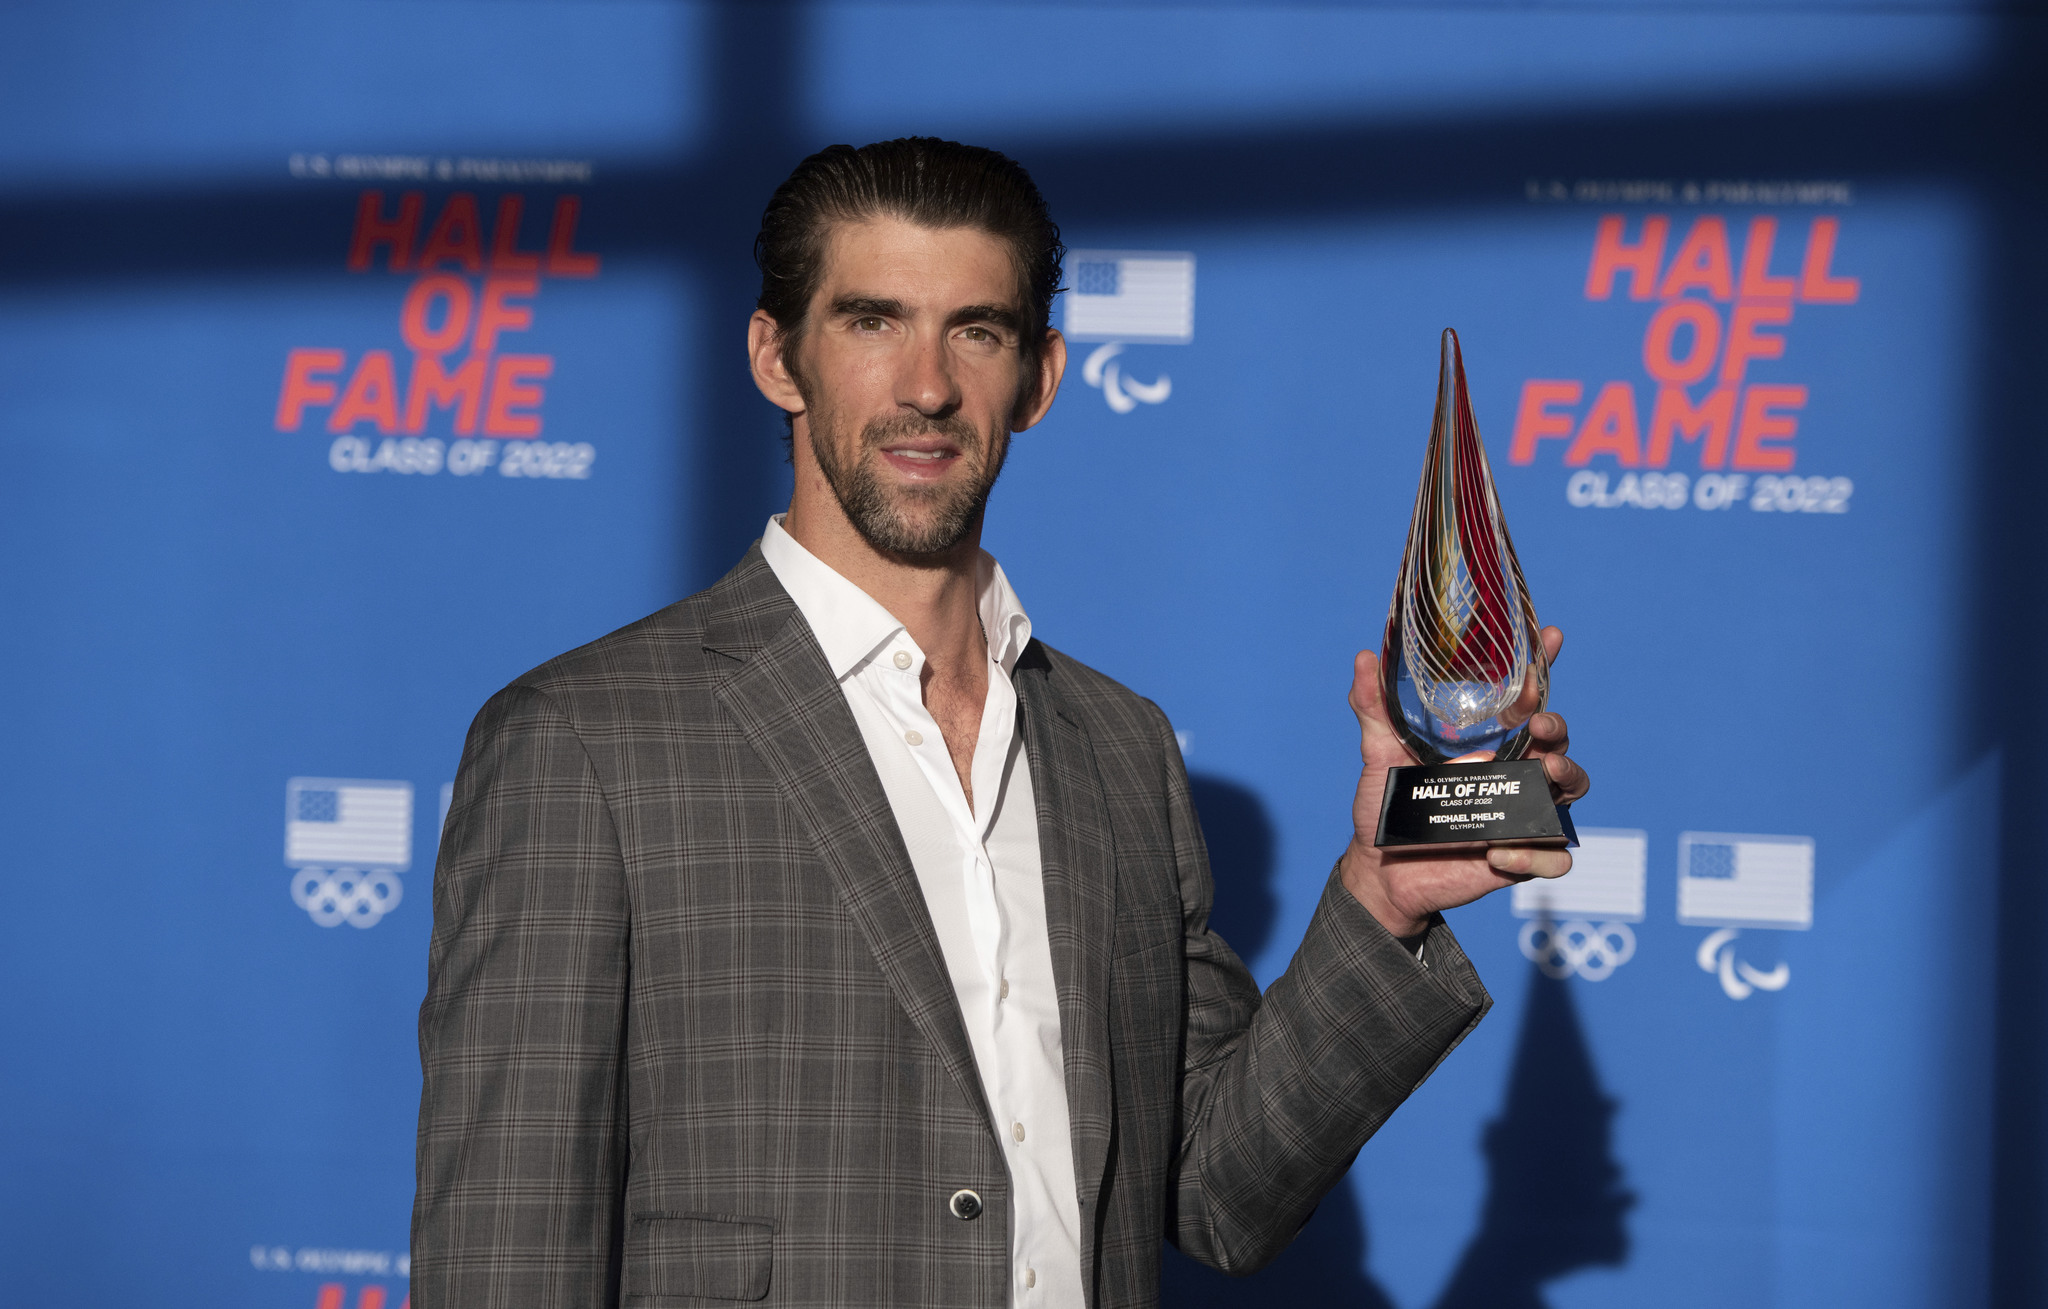 Michael Phelps attends the U.S. Olympic and Paralympic Hall of Fame induction ceremony in Colorado Springs.